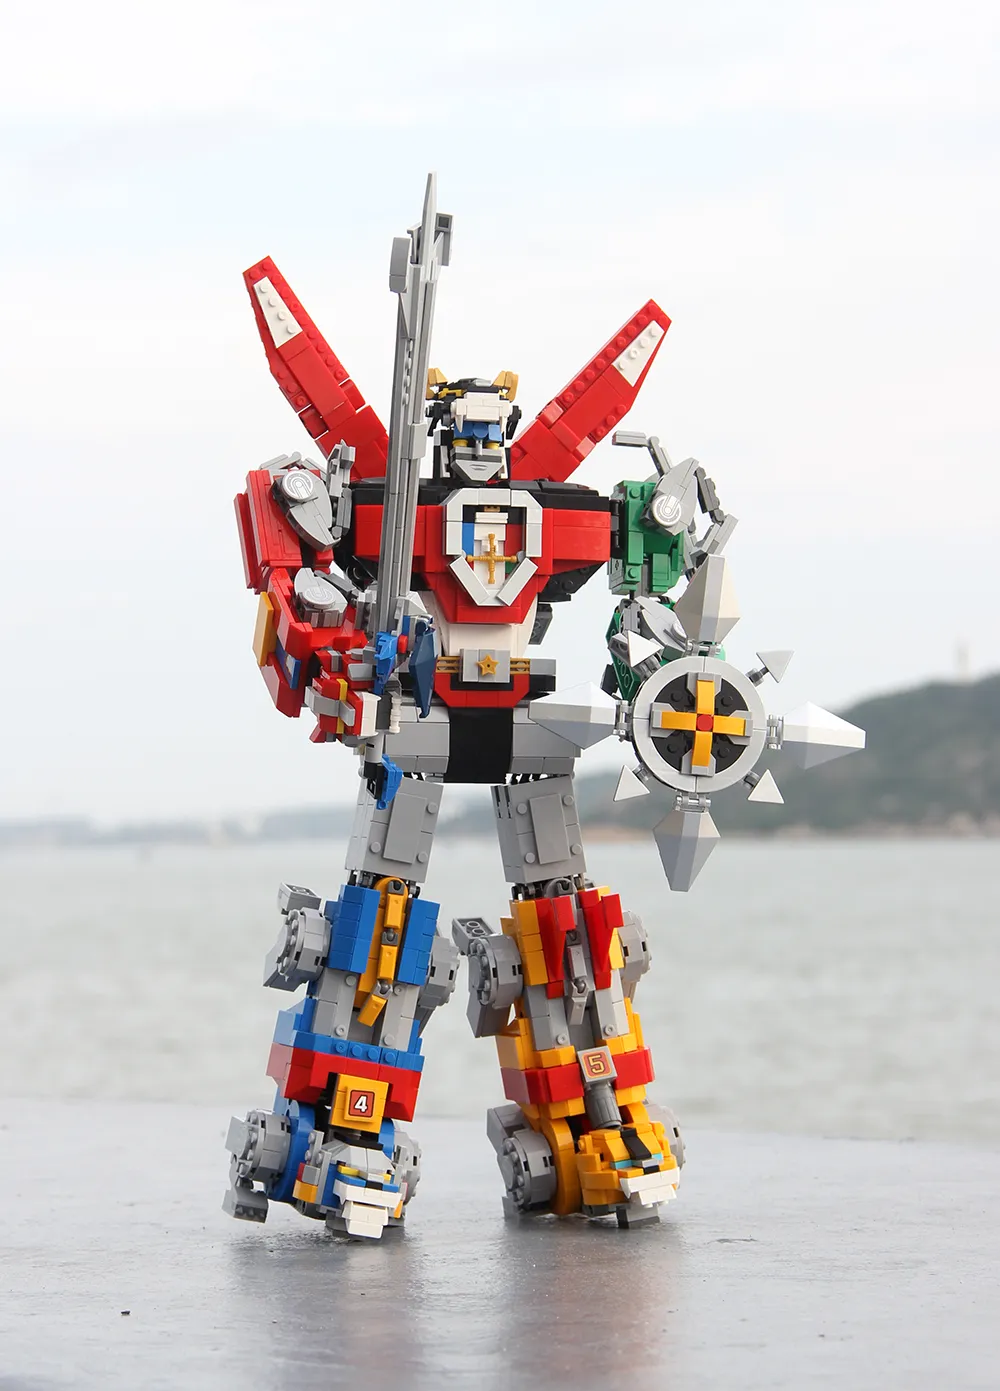 Lepin 16057 Ideas Block Series Voltron Defender of the Universe Model Building Blocks レンガ教育おもちゃ互換21311